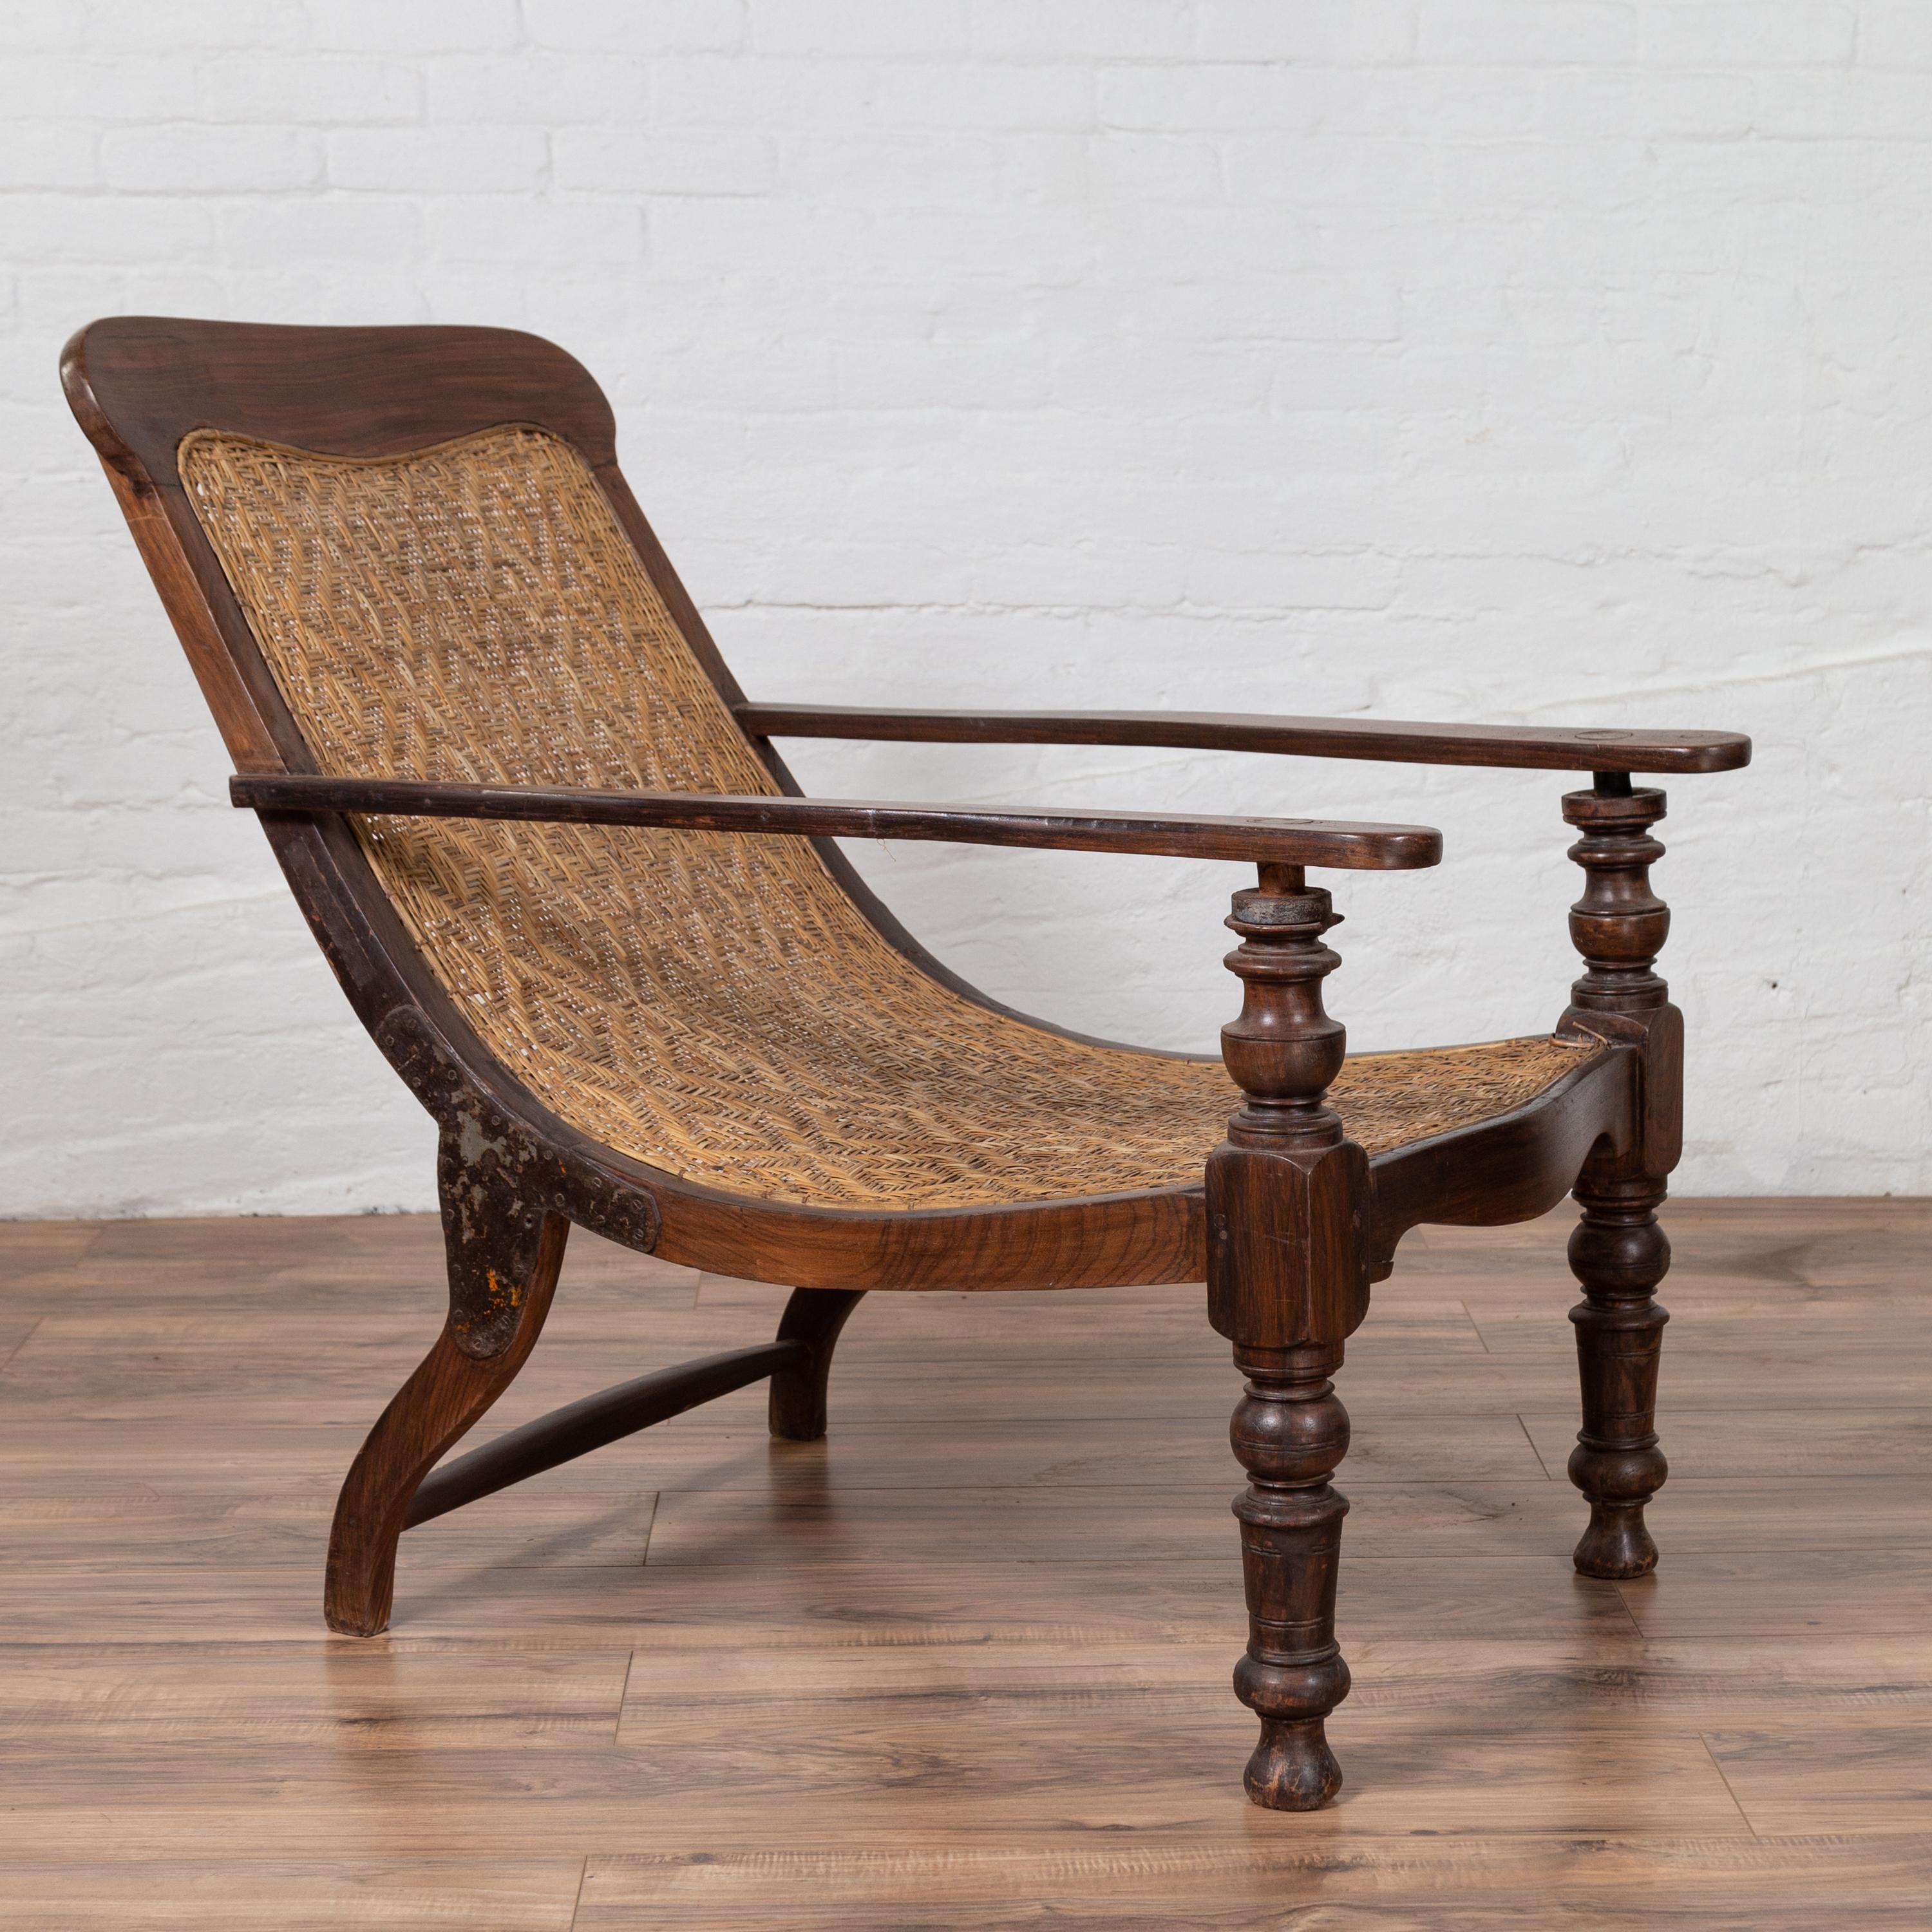 A Dutch Colonial antique Indonesian wooden plantation lounge chair with curving seat and woven rattan accents. Designed to provide a relaxing experience to the sitter, this Dutch Colonial lounge chair features a nicely curving body with rattan seat